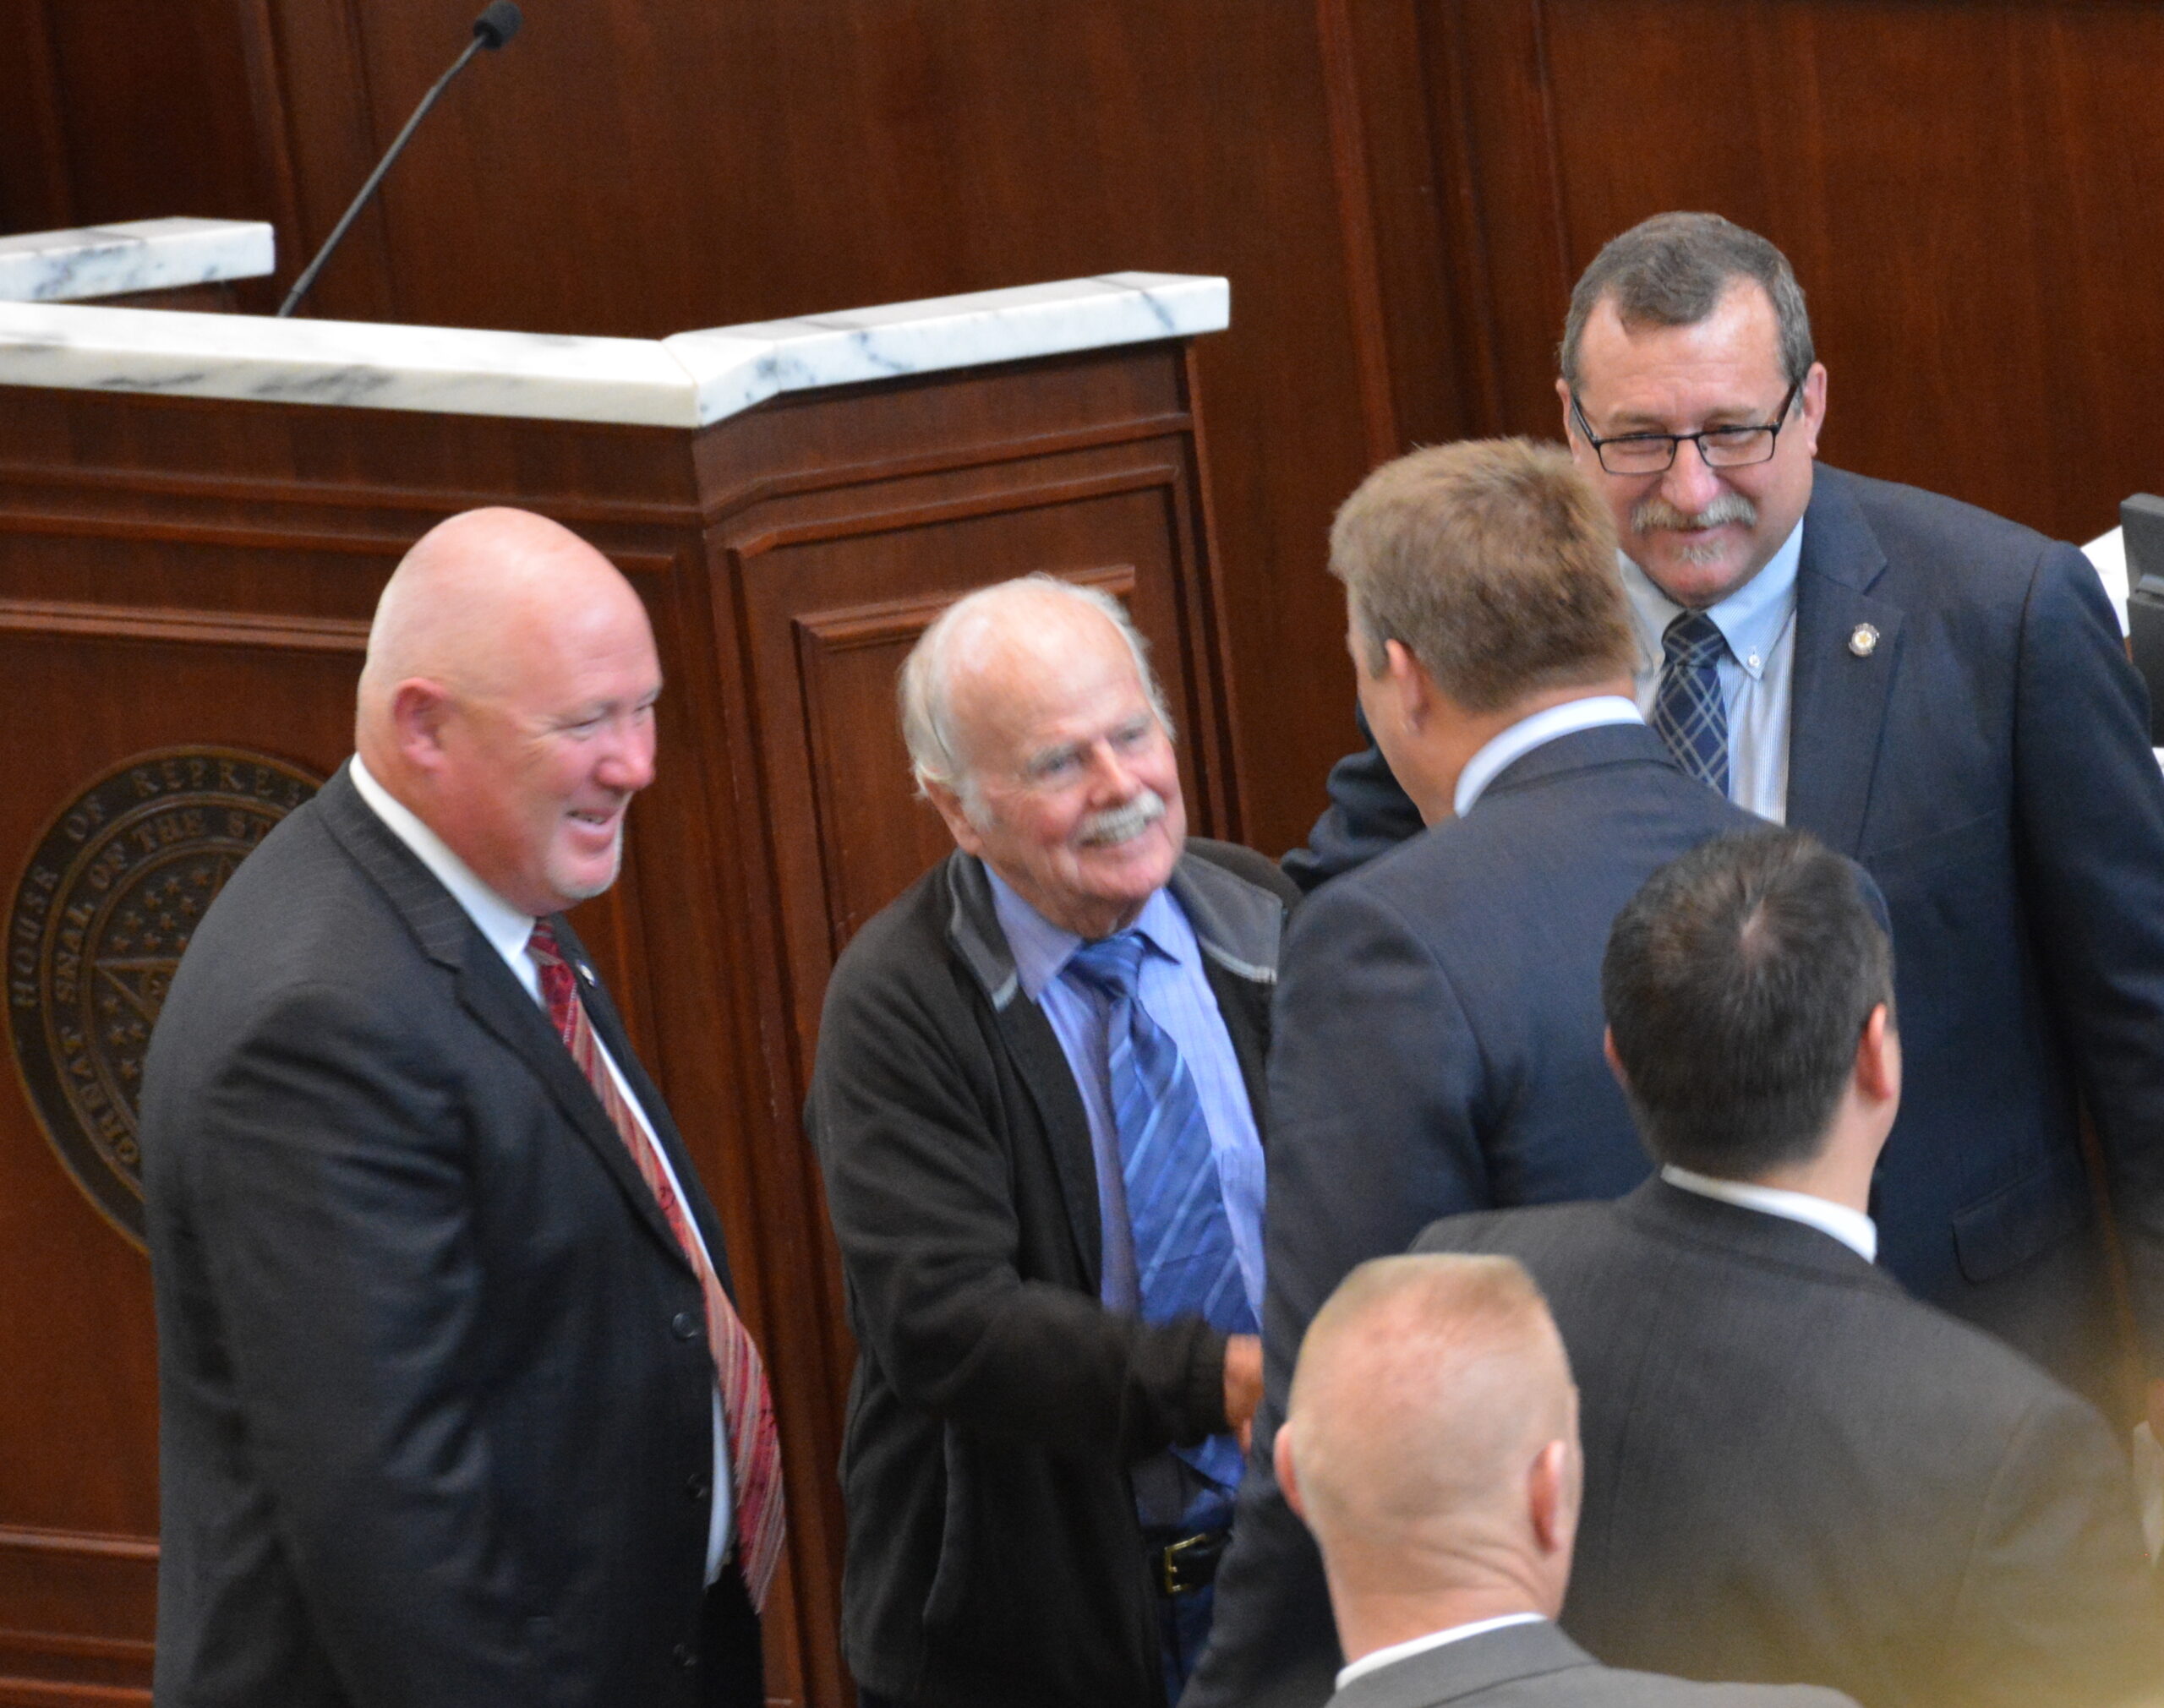 Chaplain Fox honored by house